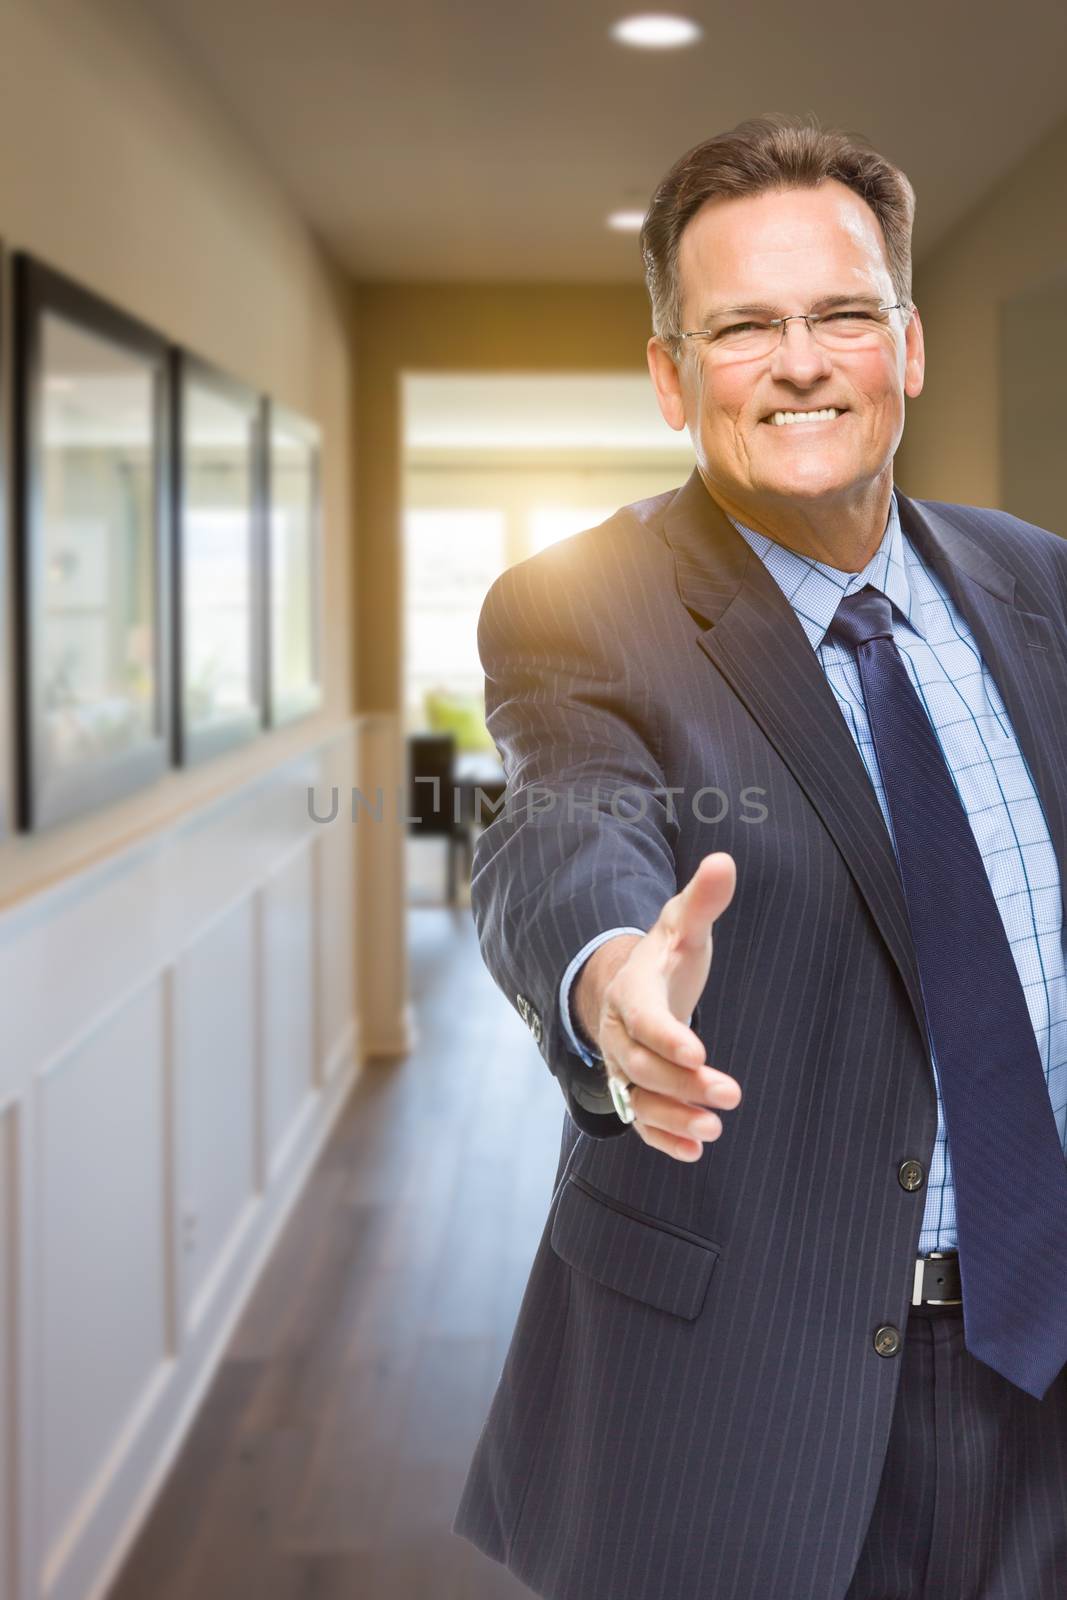 Male Agent Reaching for Hand Shake in Hallway of House by Feverpitched